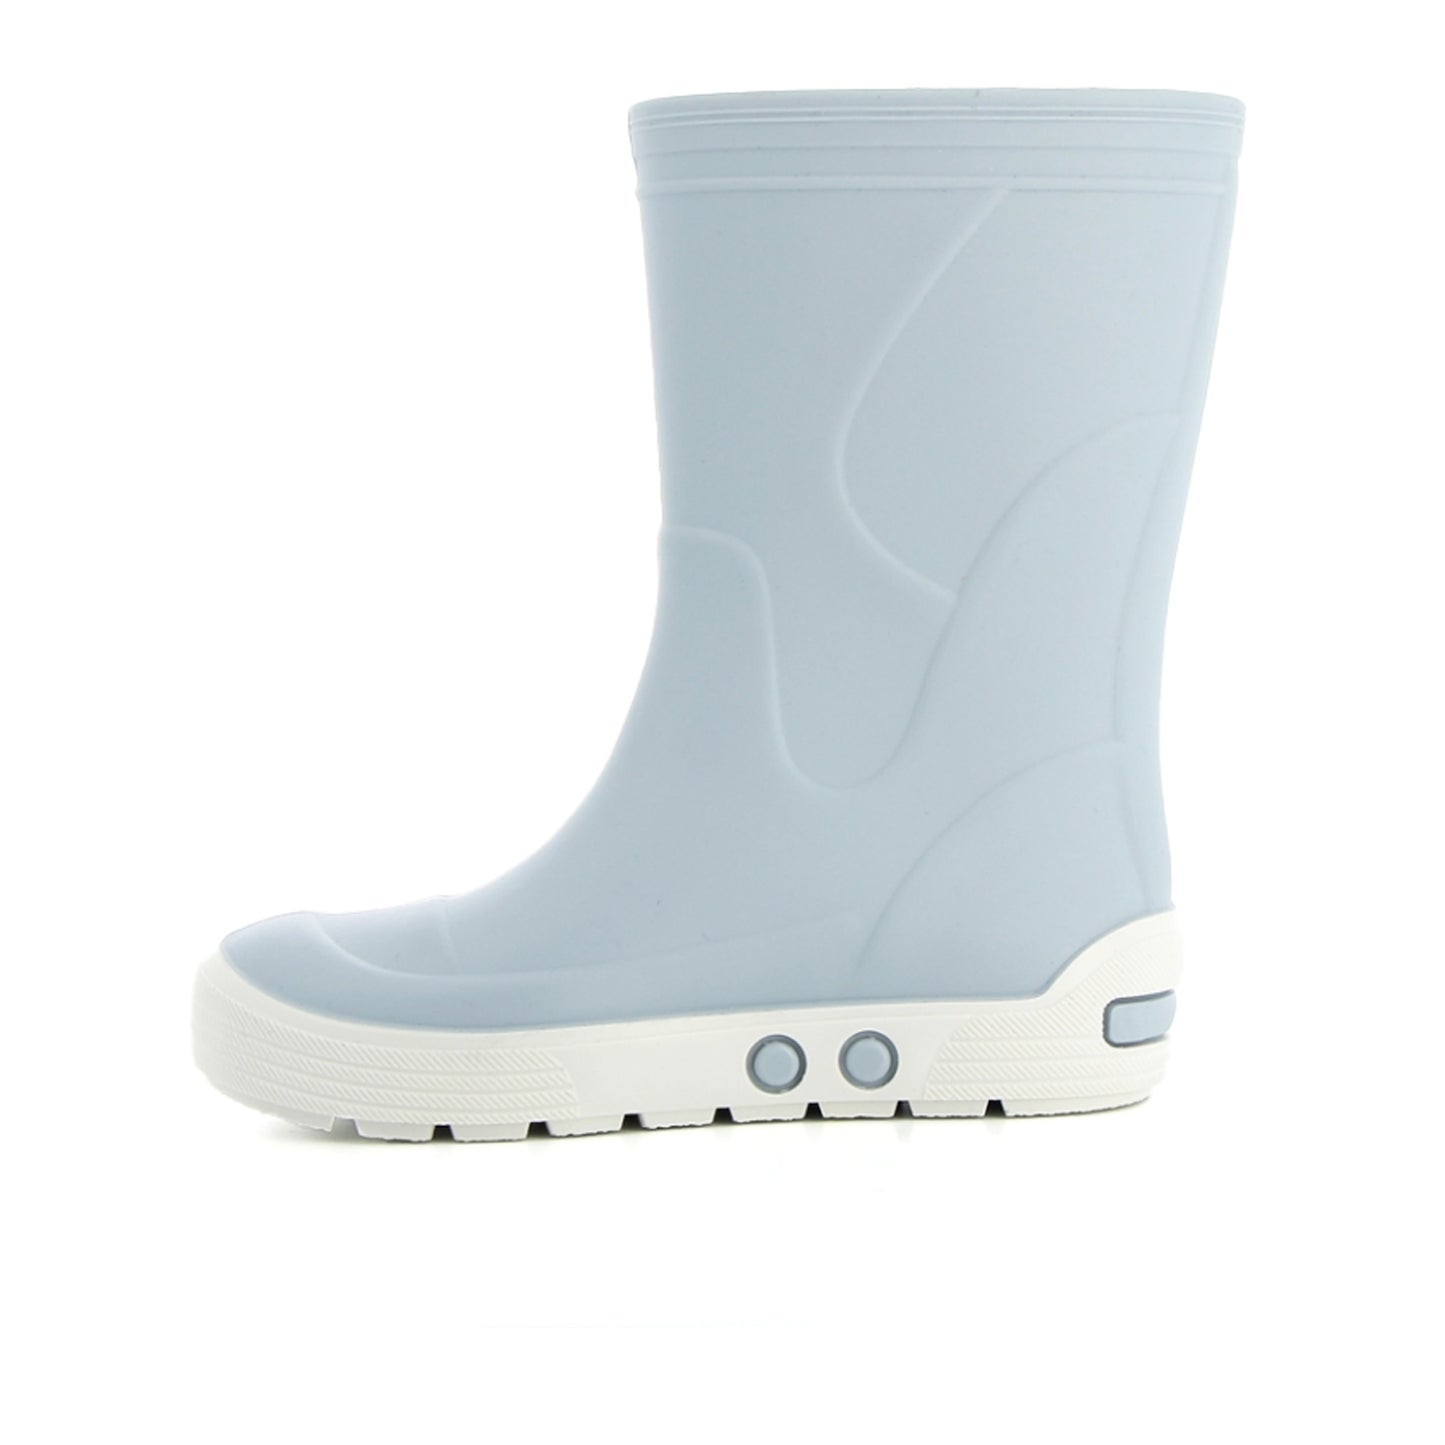 Meduse Airport Nuage Boots